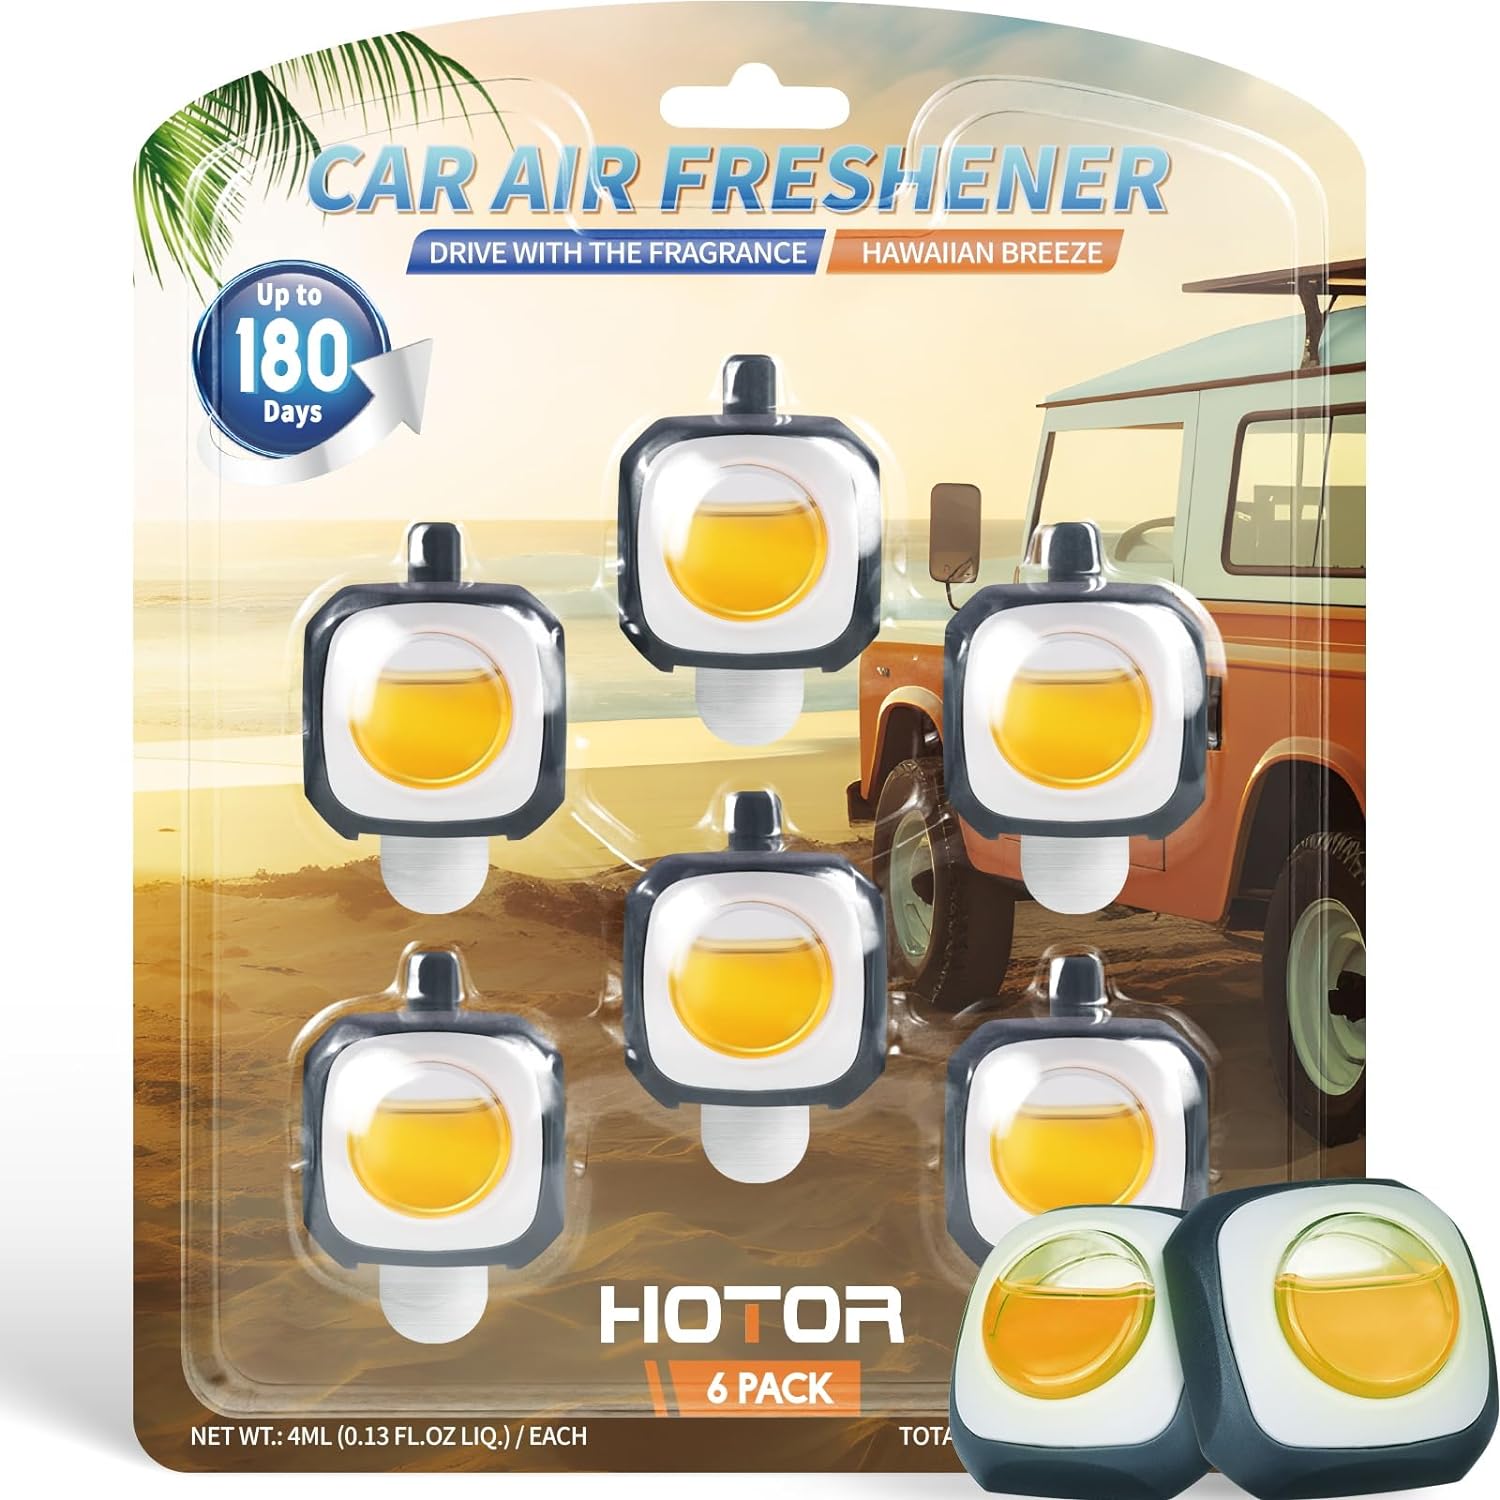 HOTOR Car Air Fresheners - Long-Lasting Car Fresheners with Large Volume of  4 ML for Each, Fragrant Air Fresheners for Car Vent Clips and Odor